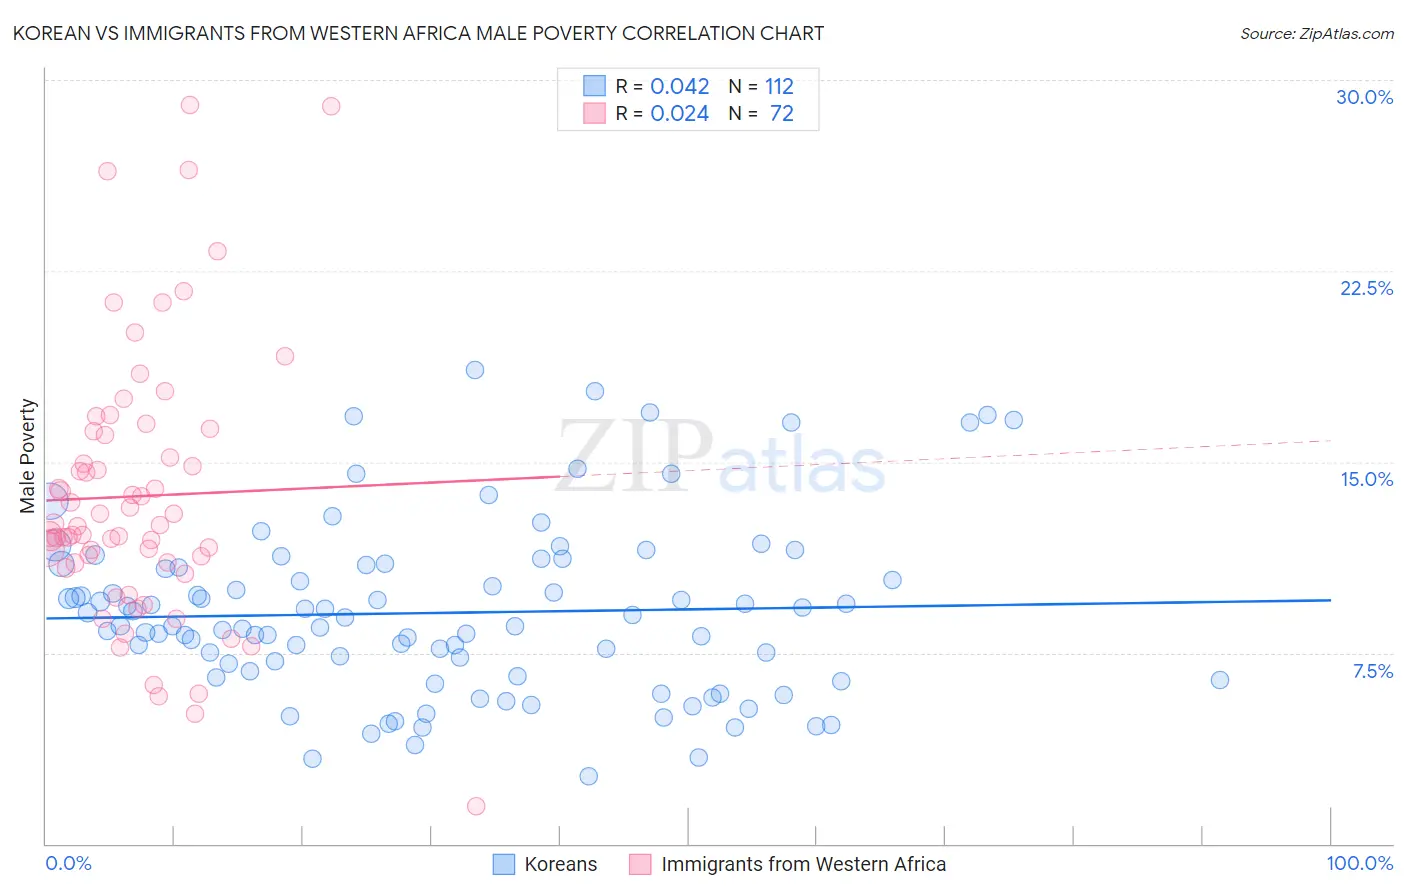 Korean vs Immigrants from Western Africa Male Poverty